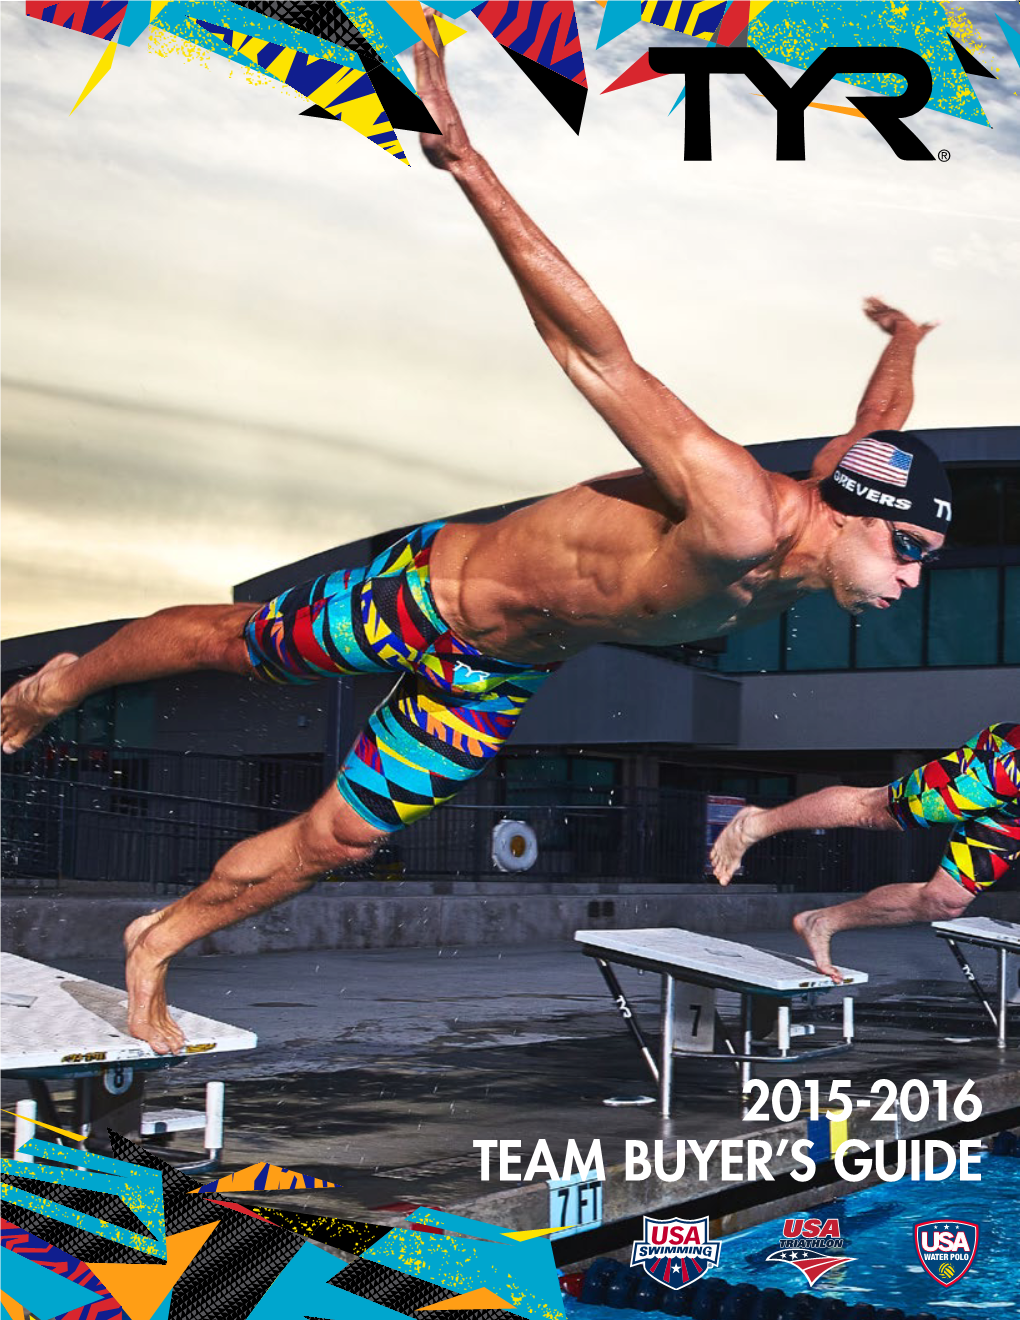 2015-2016 Team Buyer's Guide